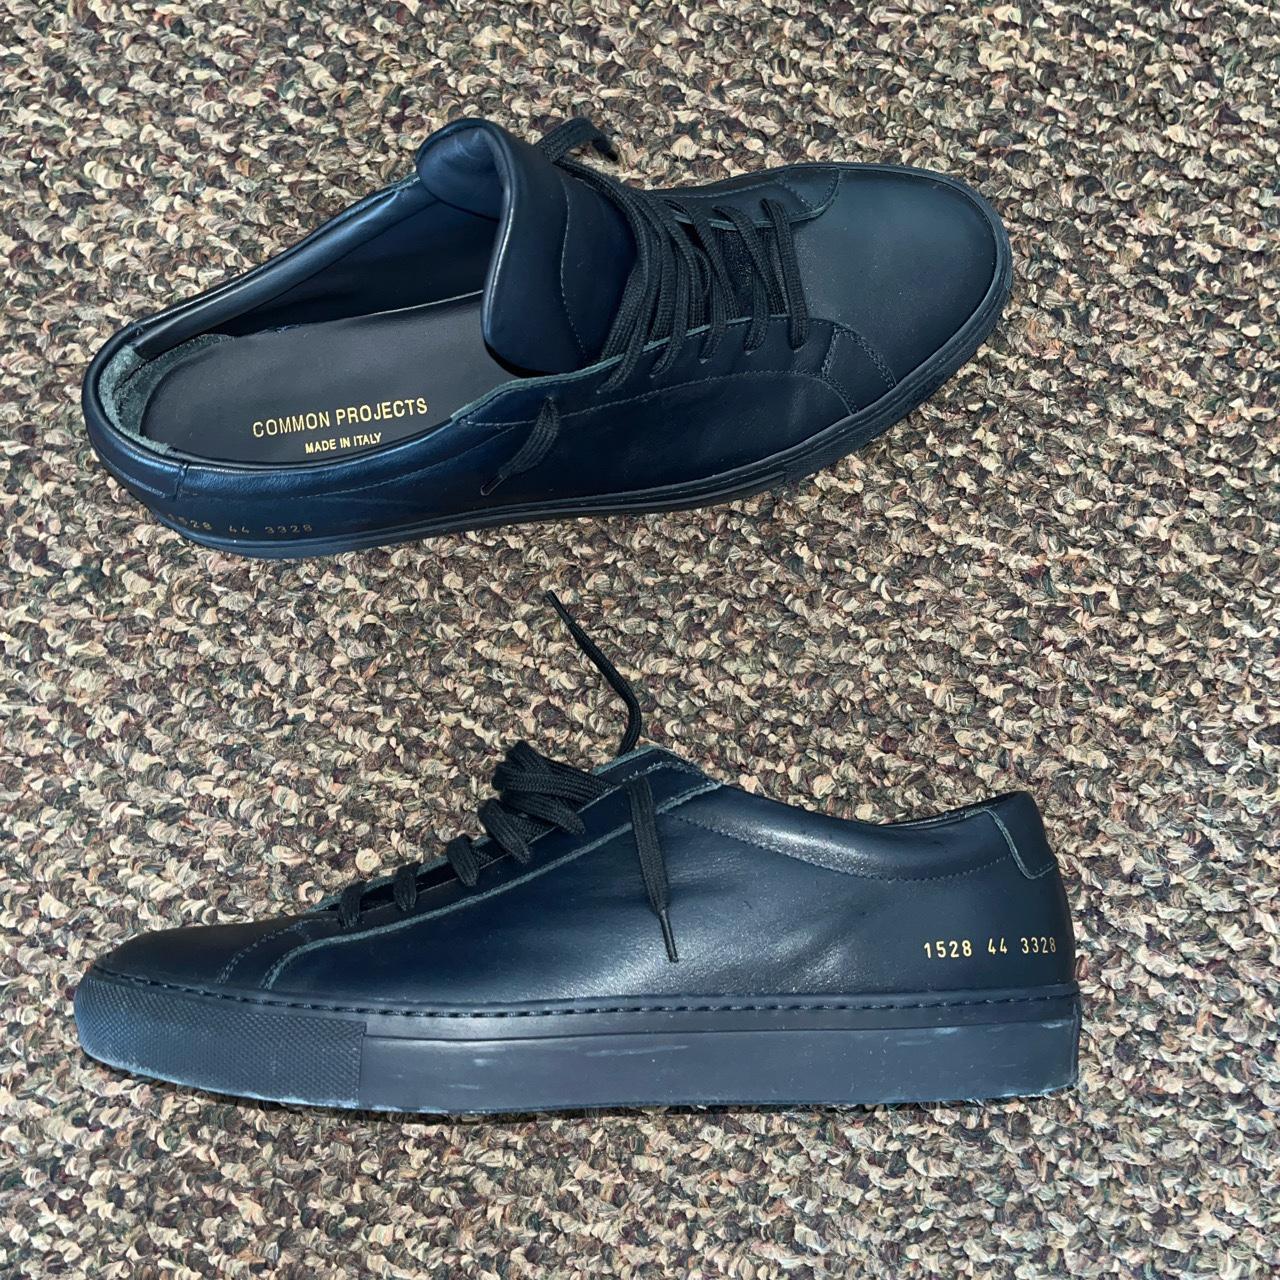 Product Image 1 - Common Projects Achilles Low Navy
#commonprojects